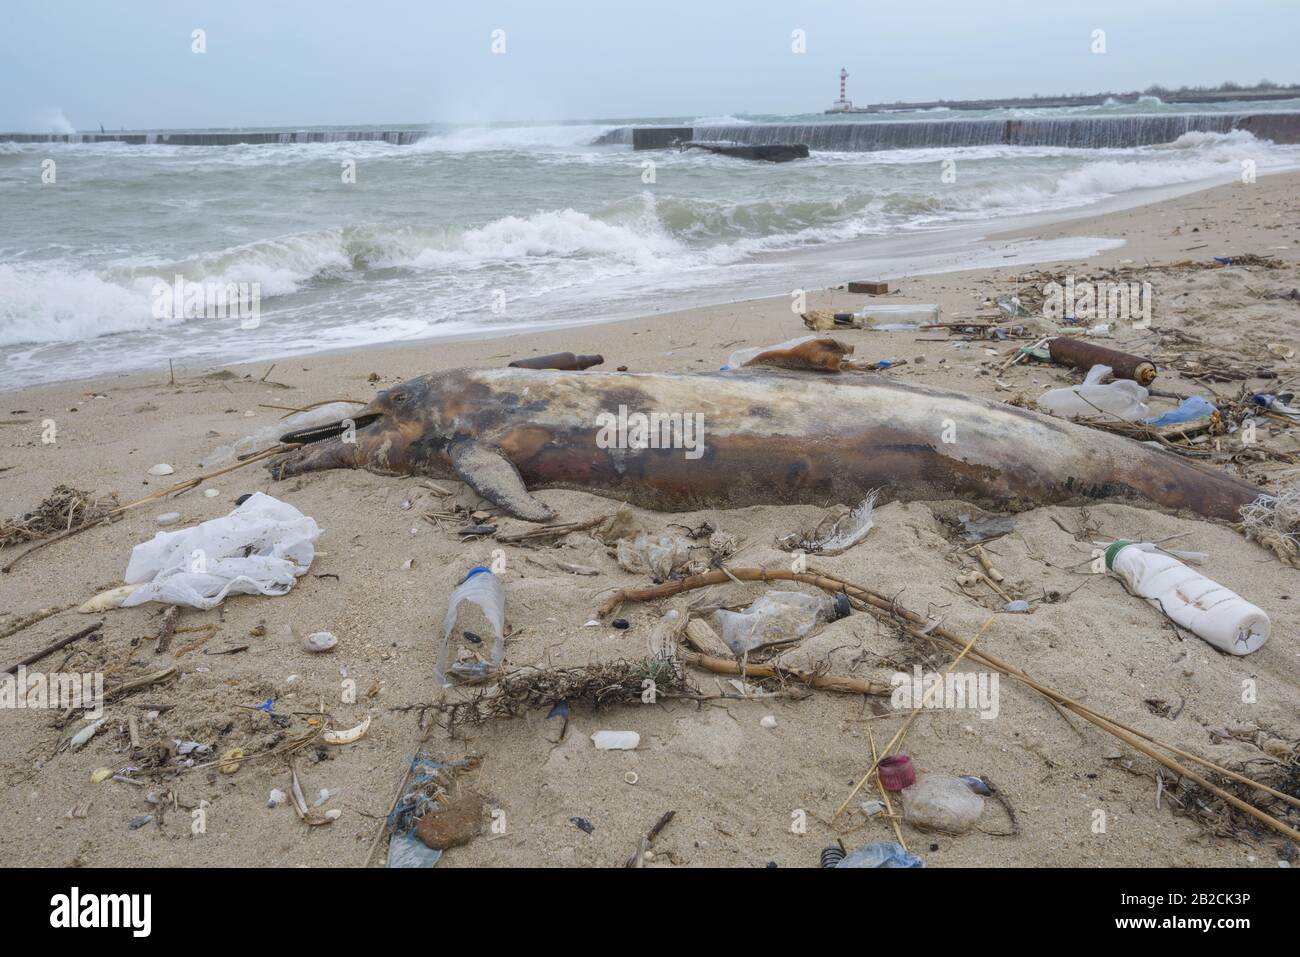 Dolphin thrown out by the waves lies on the beach is surrounded by plastic garbage. Bottles, bags and other plastic debris near is dead dolphin on sandy beach. Plastic pollution killing marine animals Stock Photo